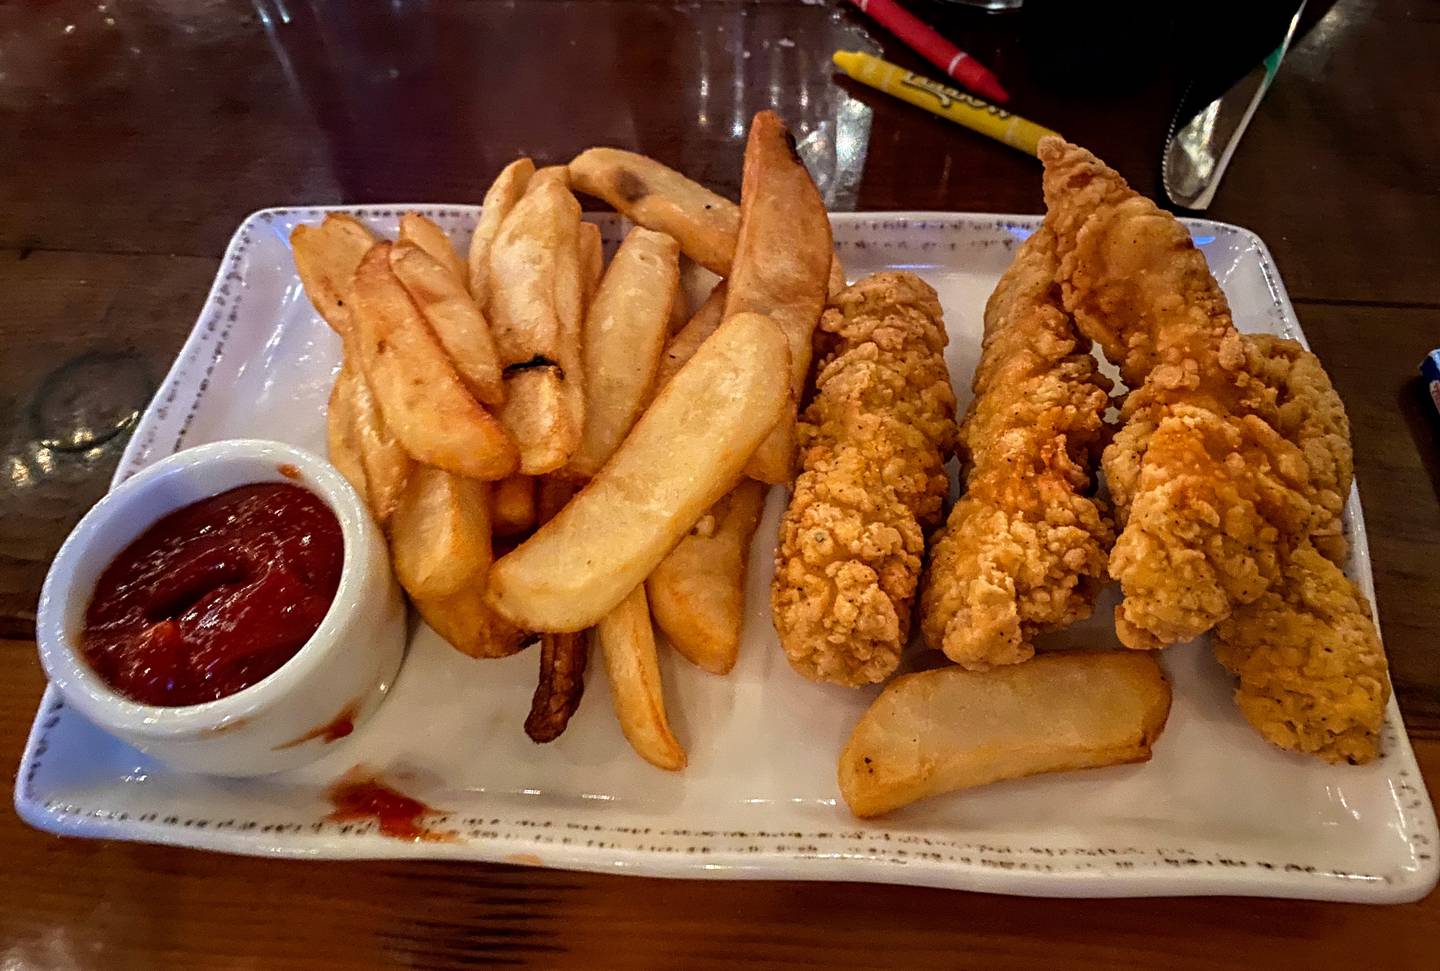 One of the kids menu selections at 750° Cucina Rustica in Cary was chicken tenders ($7.90).